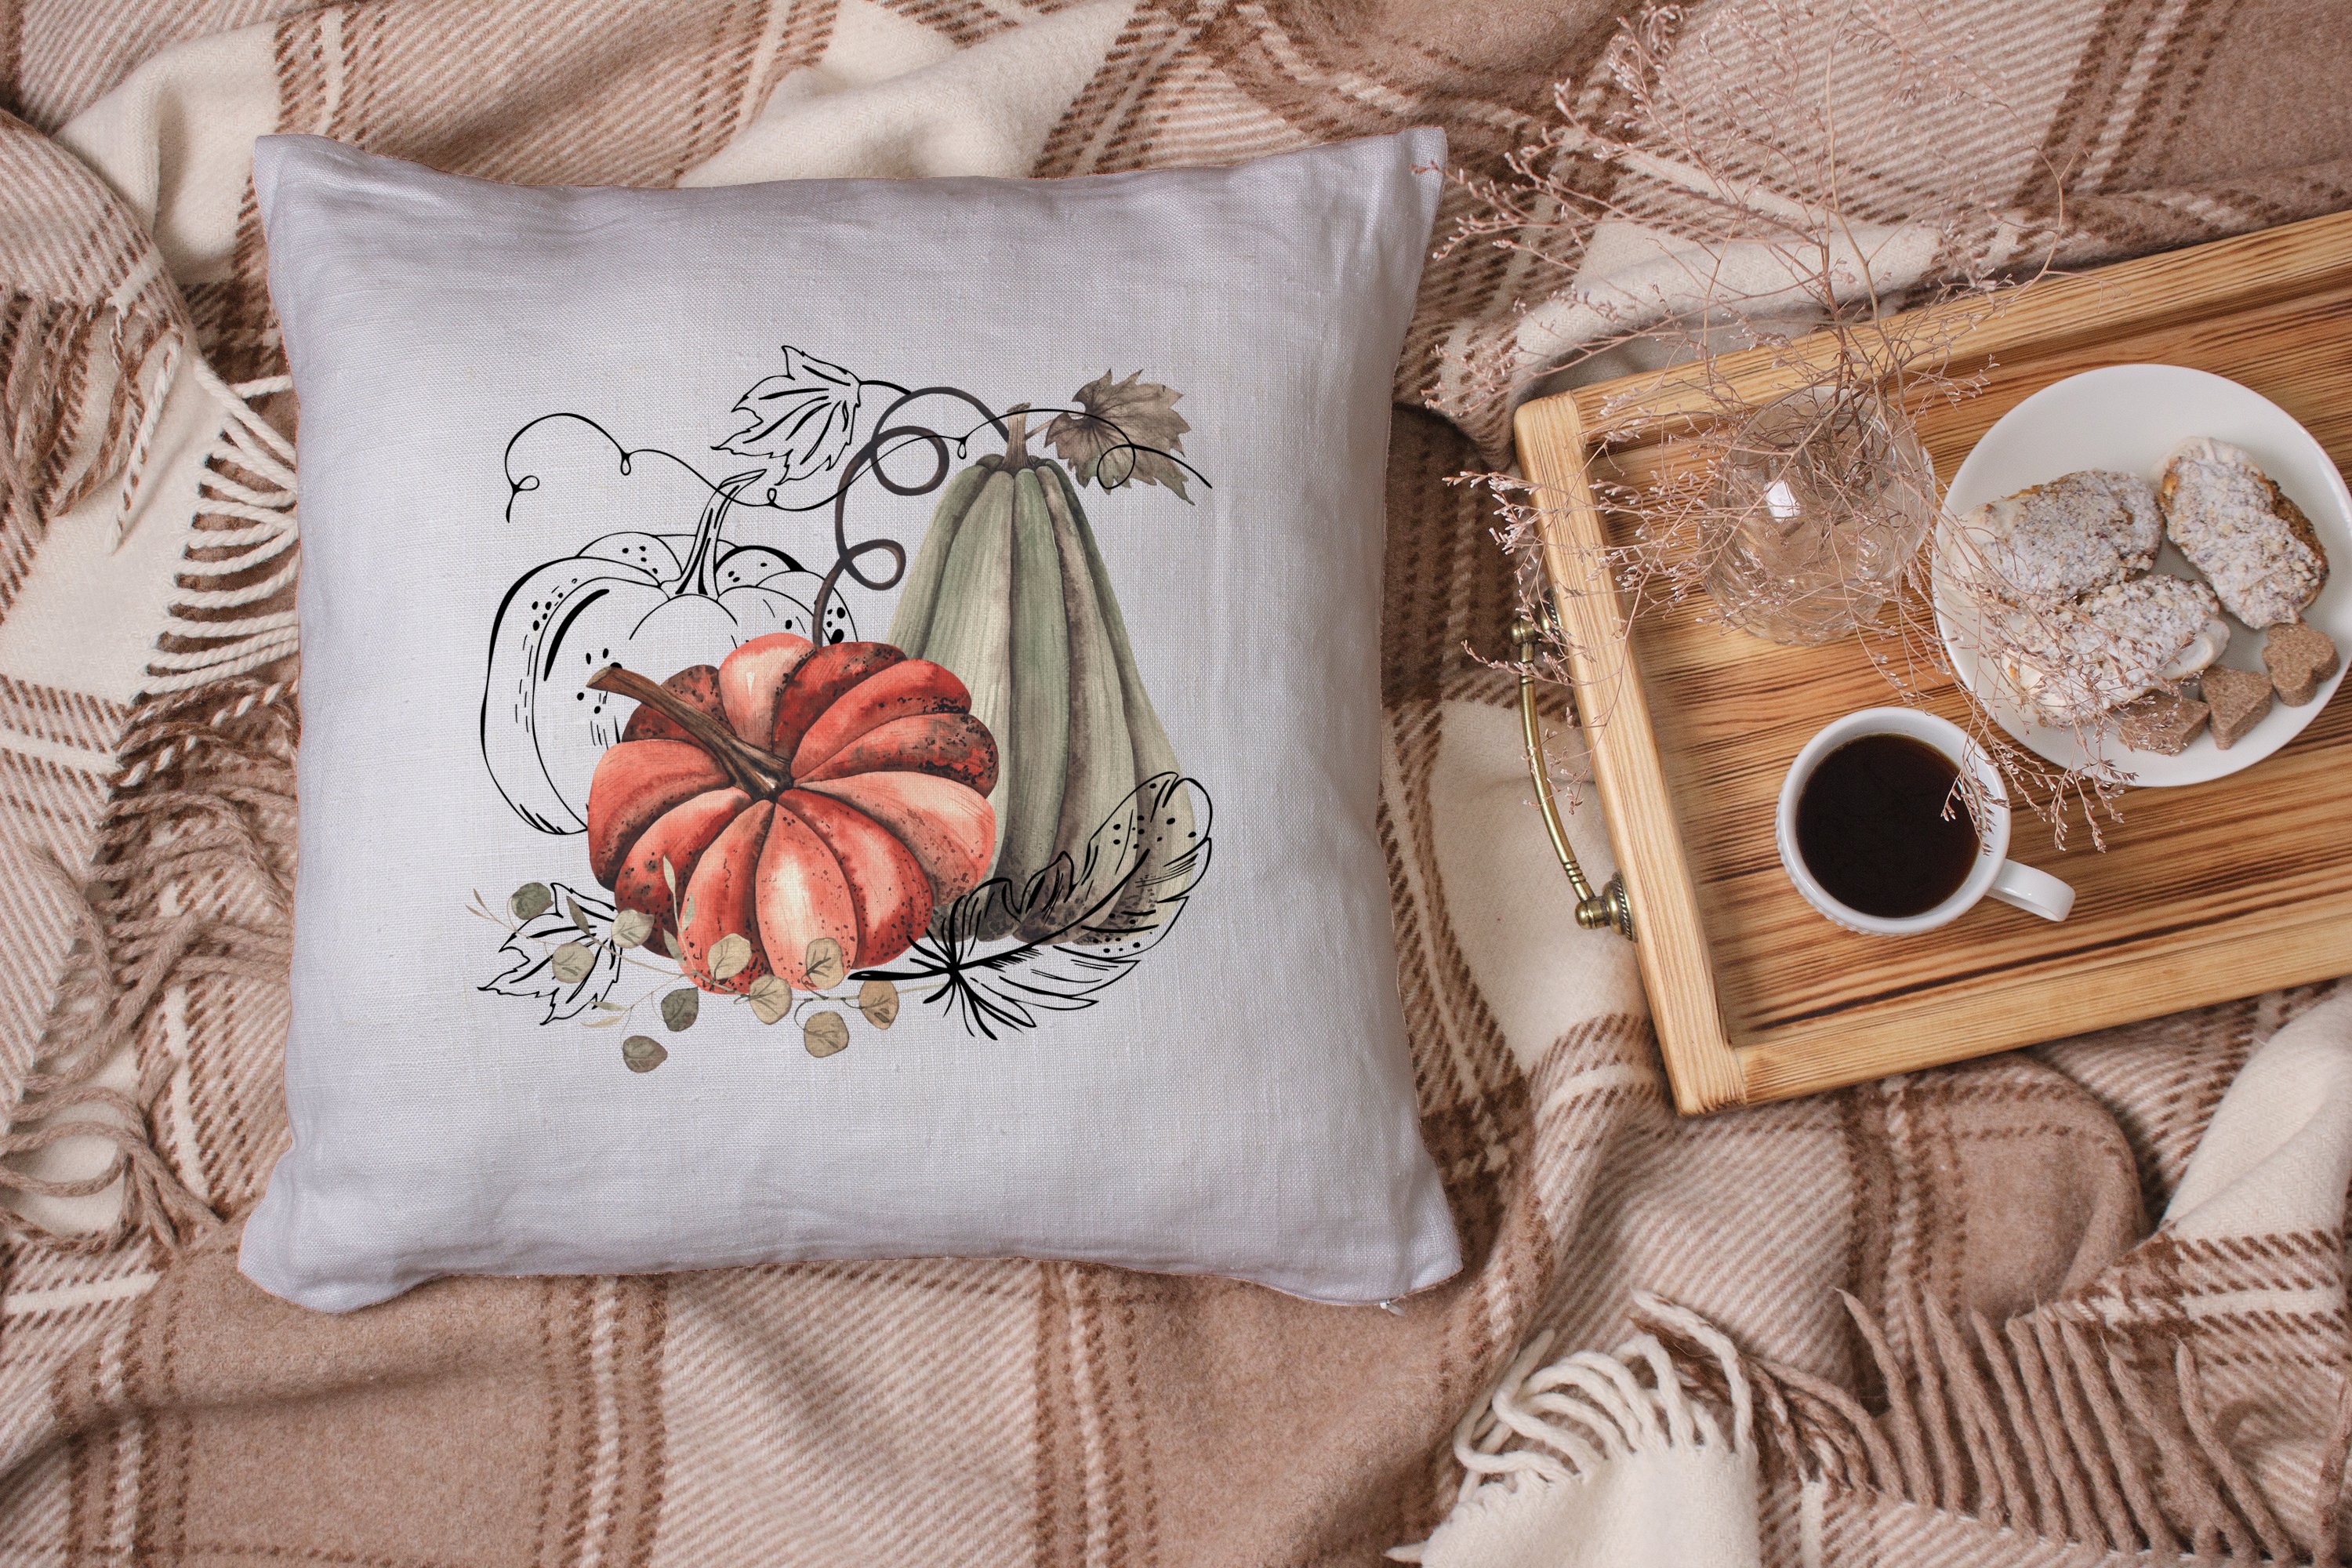 Decorate grey pillow with the orange pumpkin.